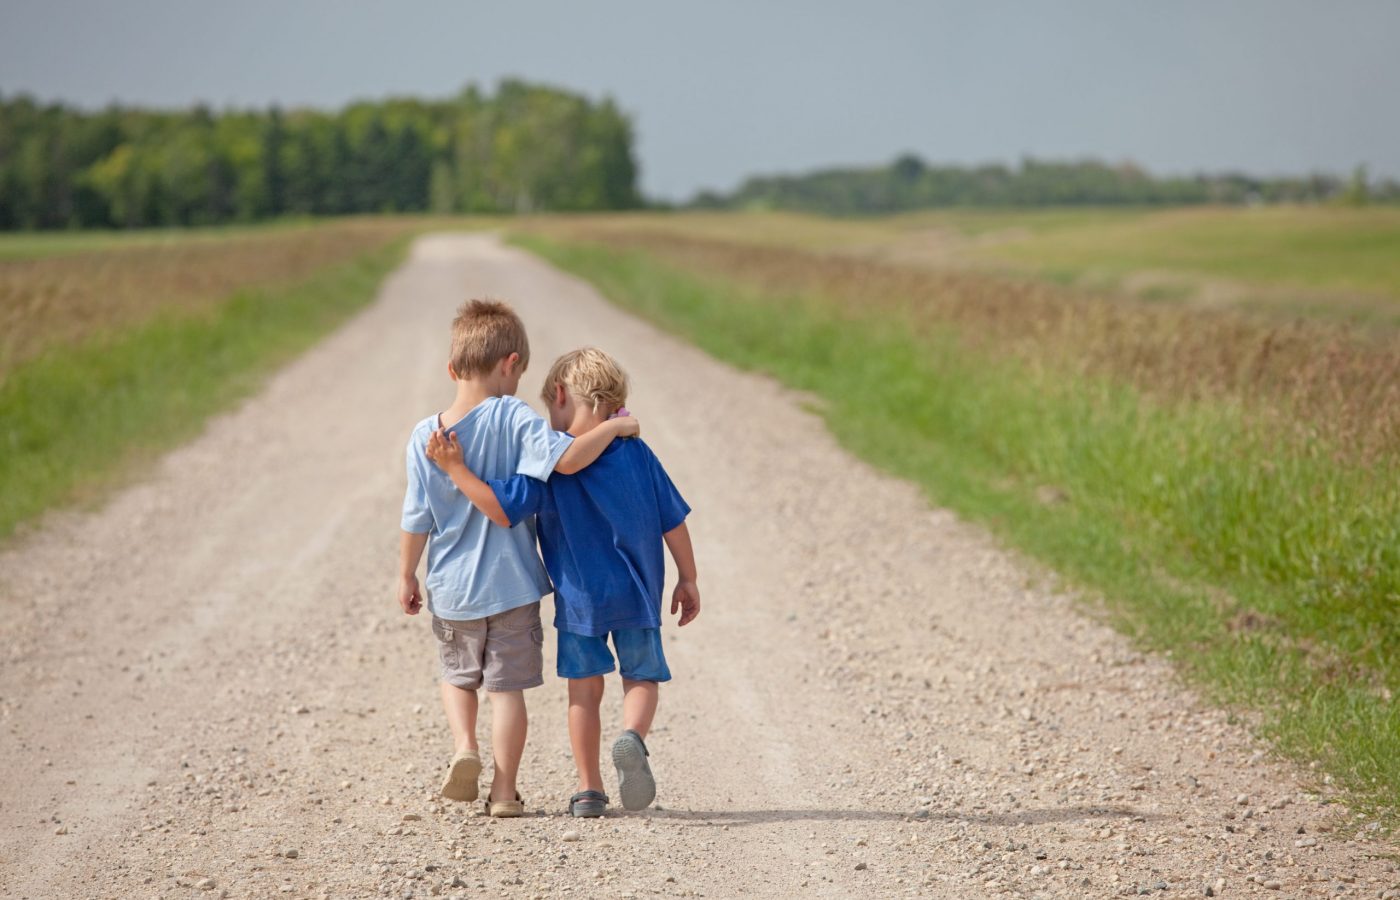 Two young boys walking arm in arm down a rural country gravel road. Prairie scene. Elementary aged caucasian children. Horizontal color image. Additional themes include friendship, bonding, boys, embracing, hugging, love, relationships, brothers, kindergarten, preschool, talking, care, best friends, and summer.